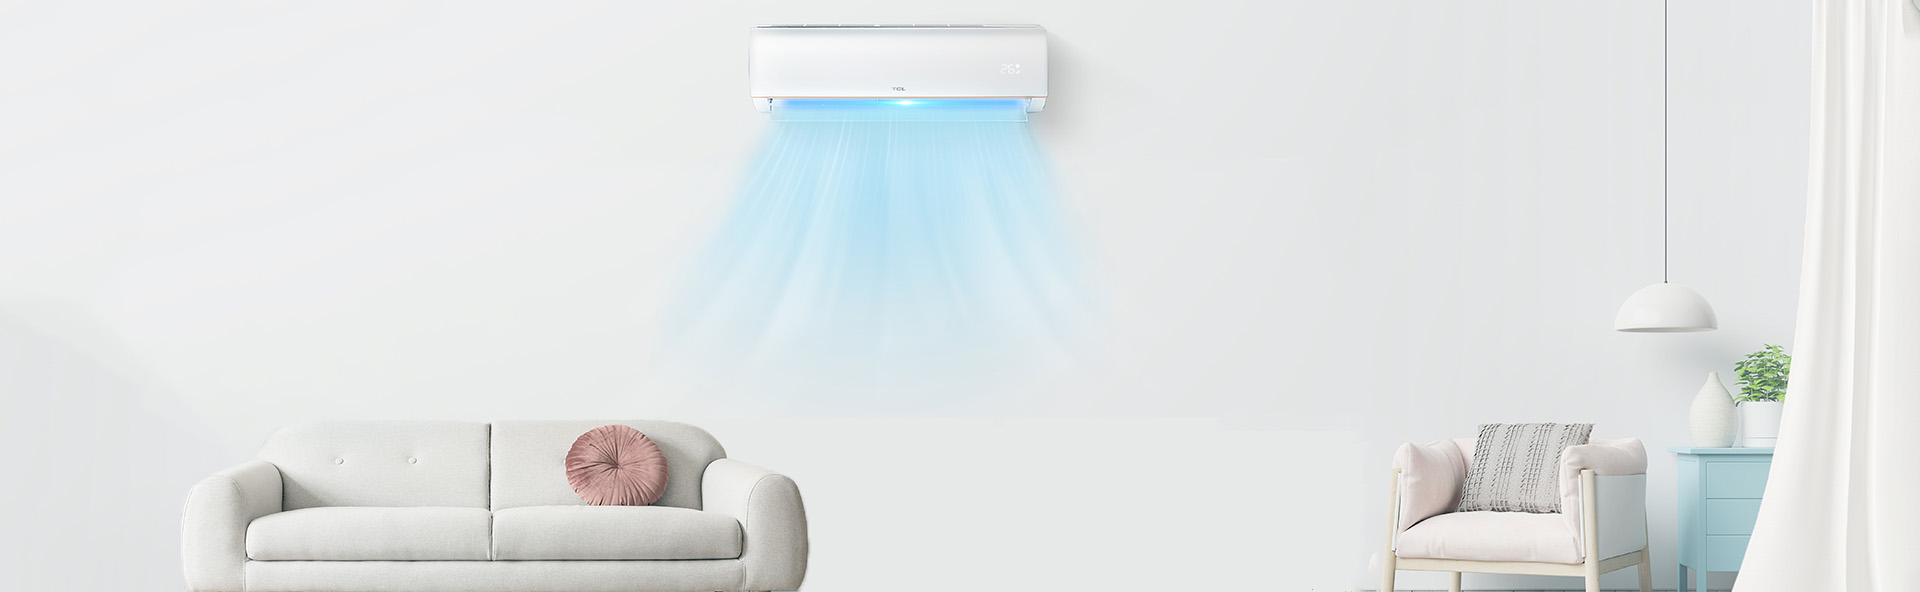 Best Ac Temperature: The Very Best Way To Stay Cool While Saving Money